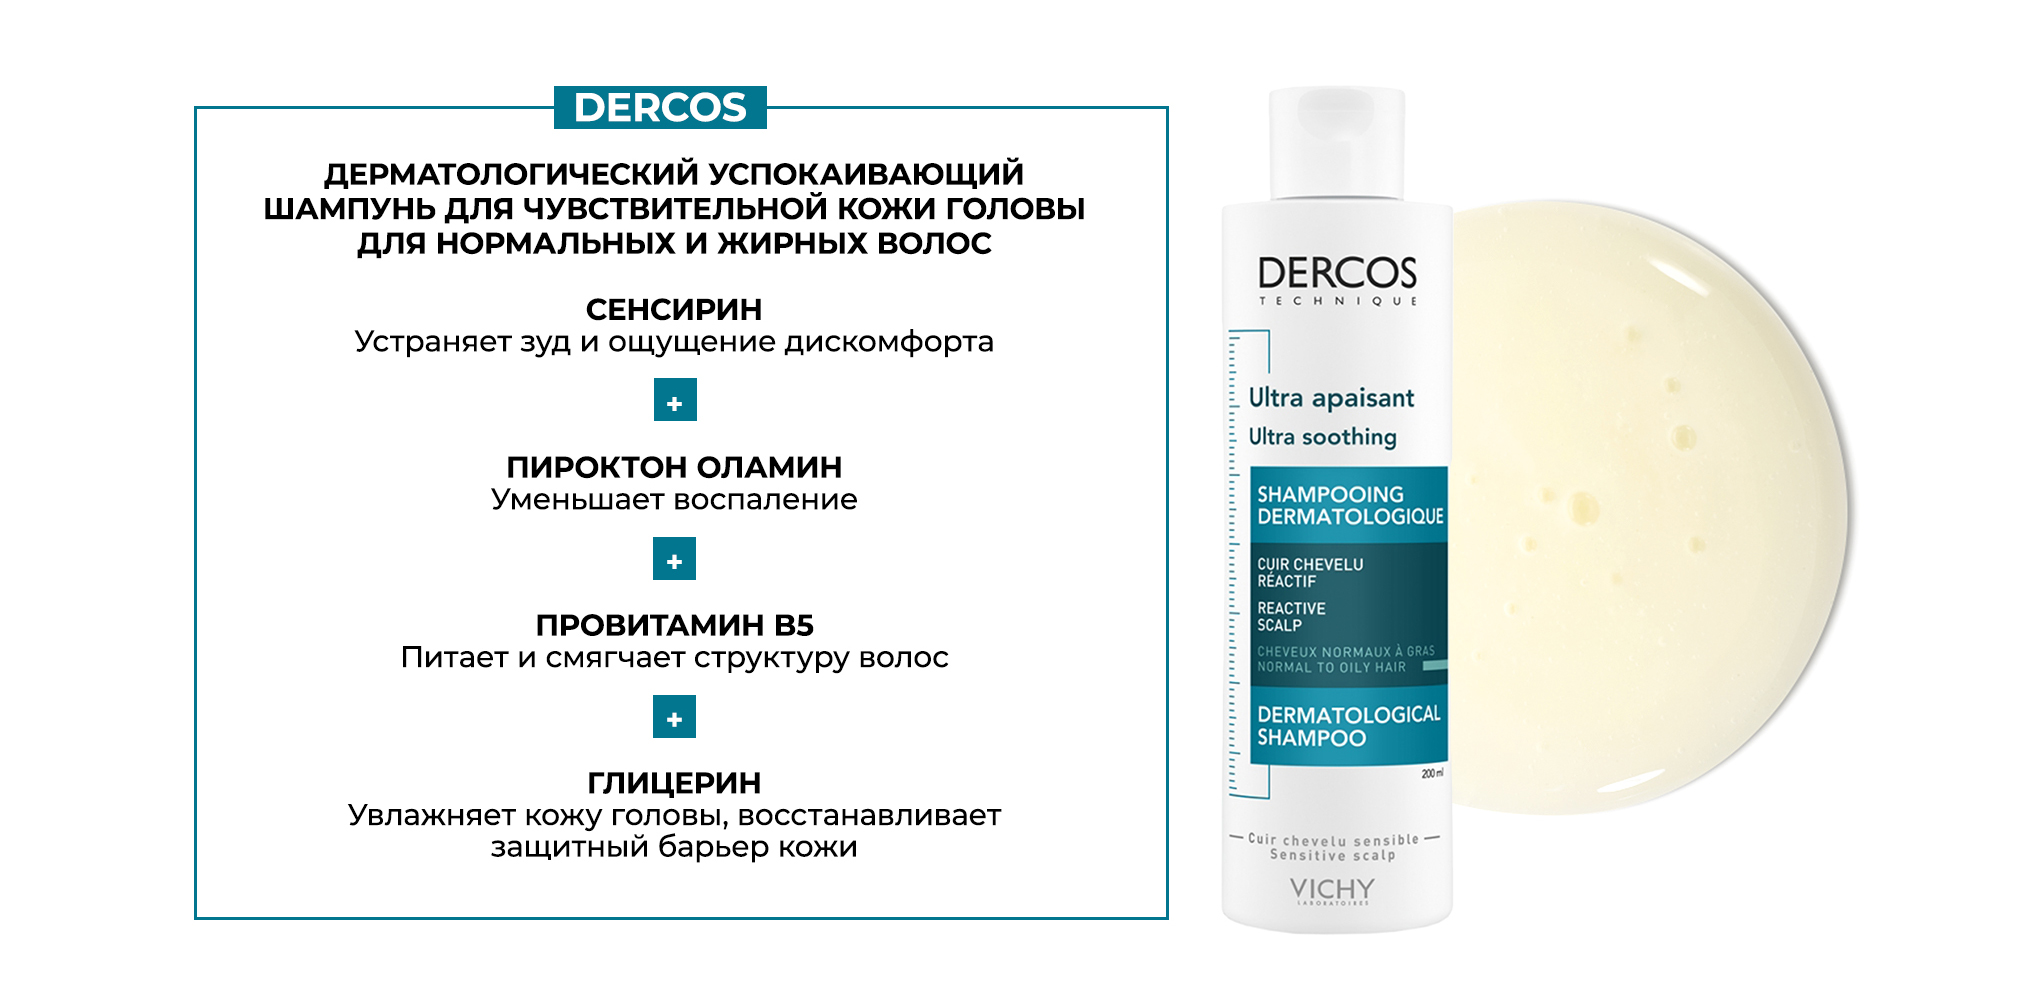 Vichy Dercos Ultra Soothing Normal to Oil Hair Shampoo